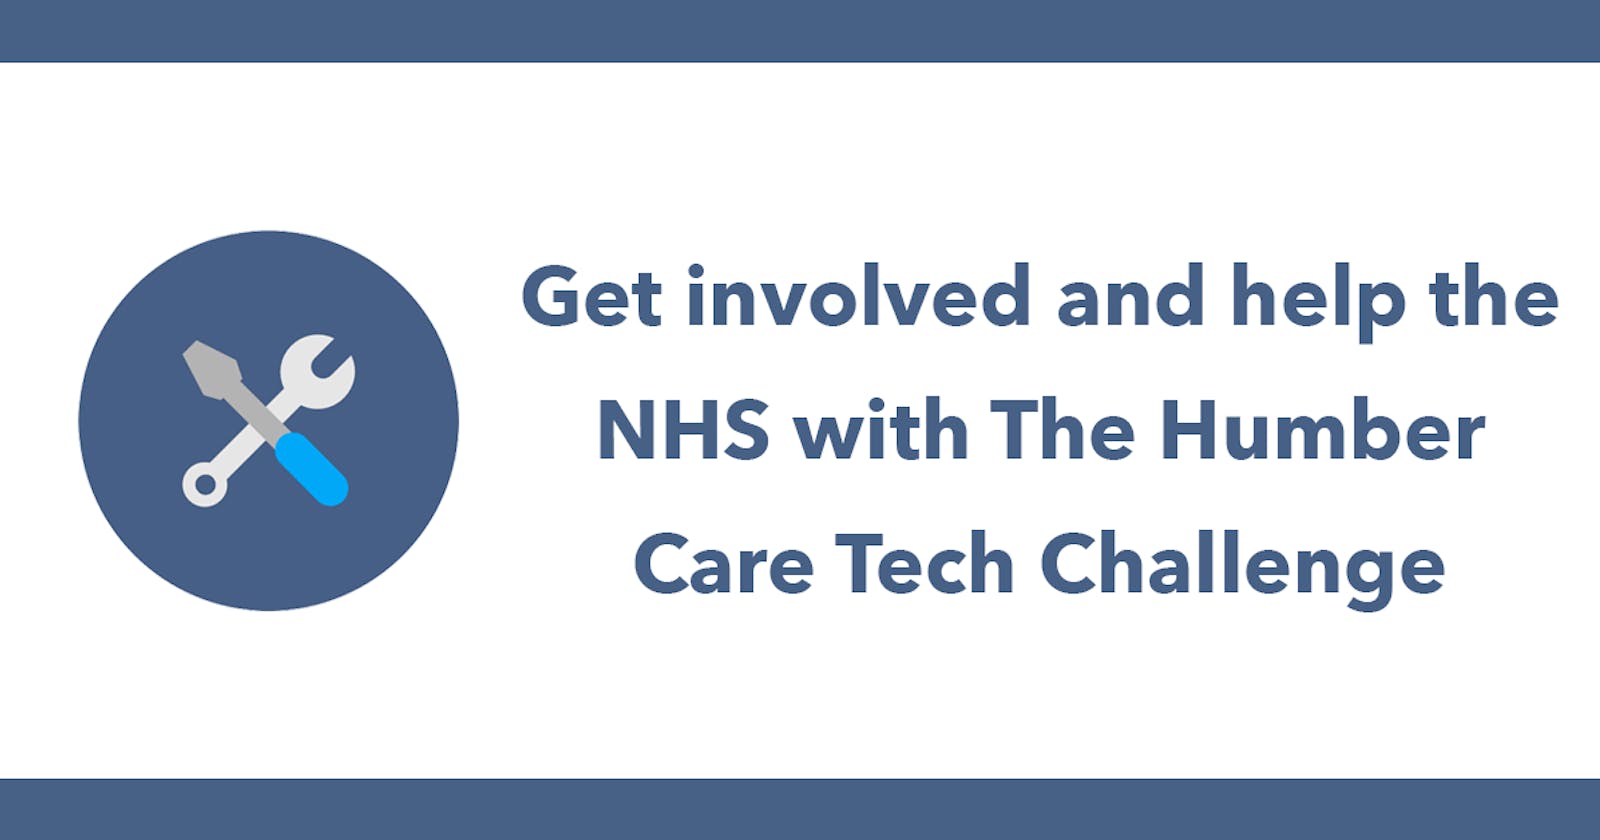 Get involved and help the NHS with The Humber Care Tech Challenge